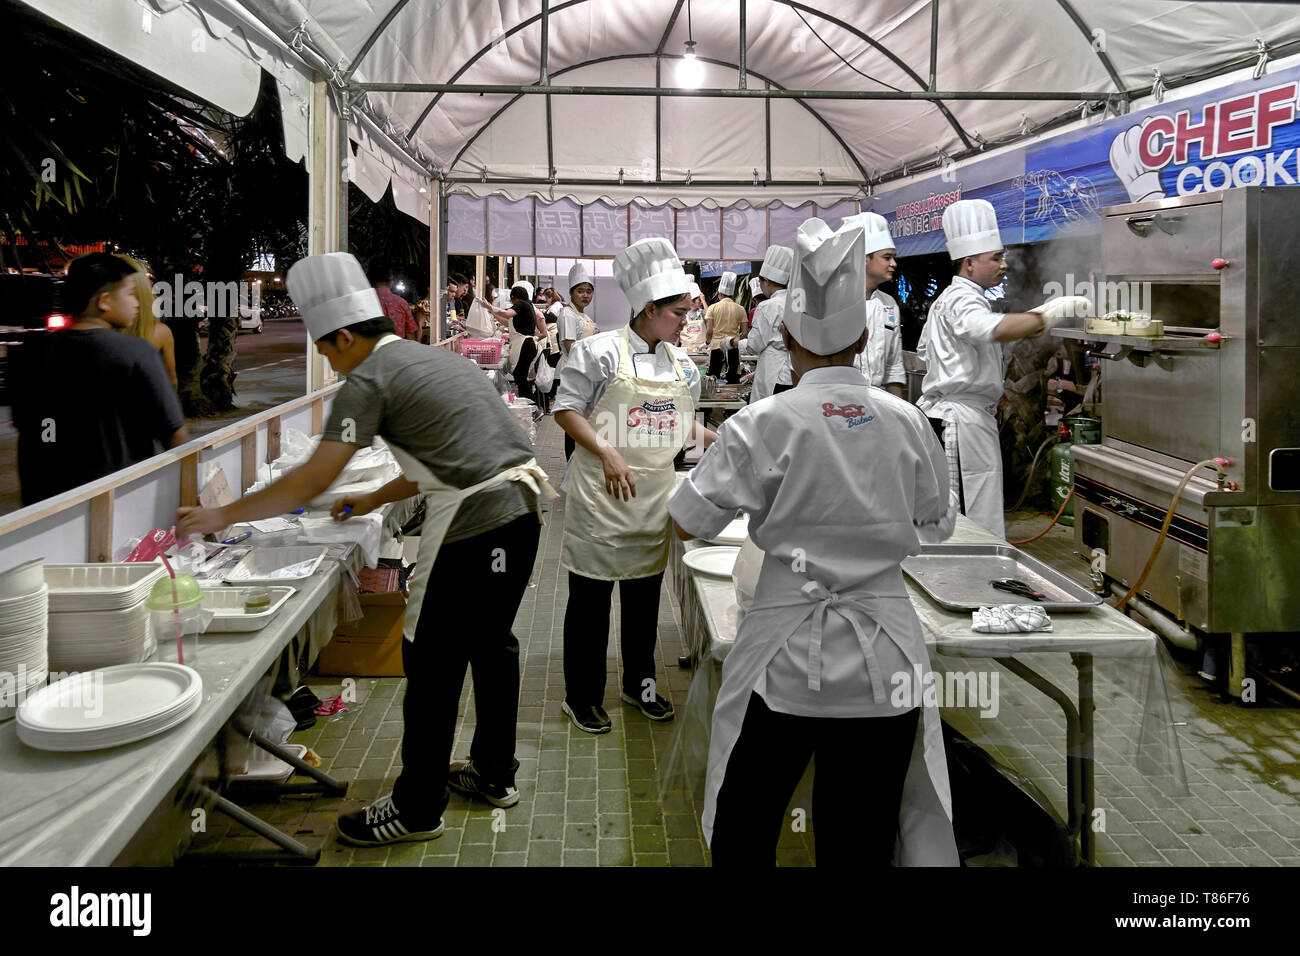 Chefs in the kitchen preparing food for the annual food festival at Pattaya Thailand Southeast Asia Stock Photo